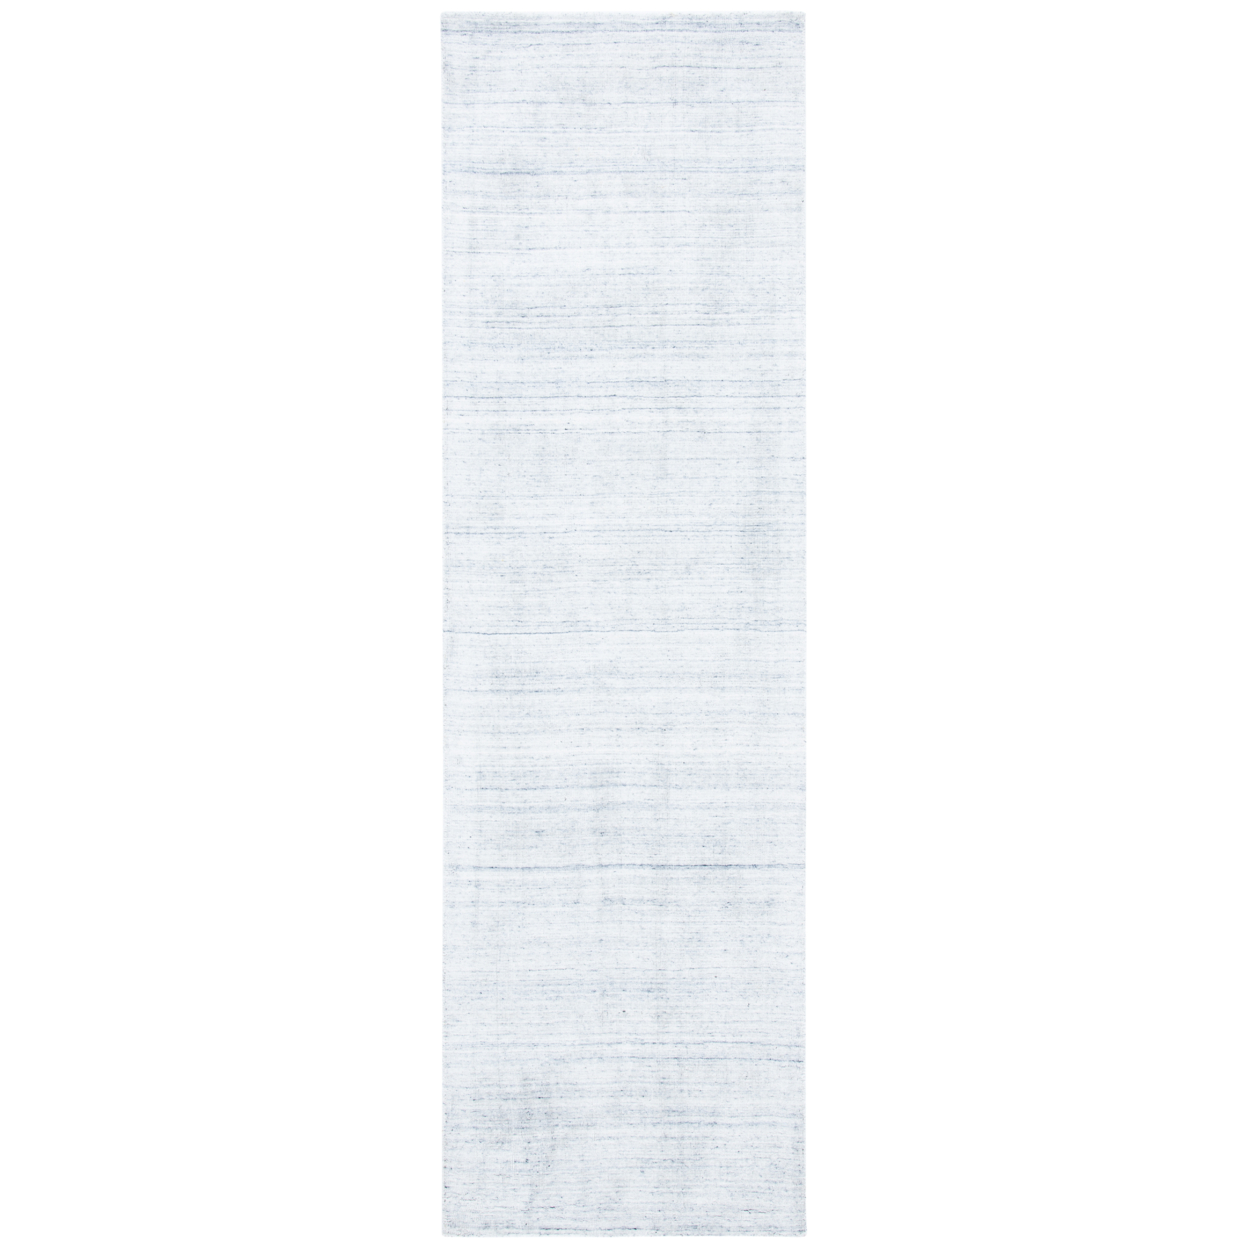 Safavieh MIR176A Mirage Ivory / Silver - 6' Square